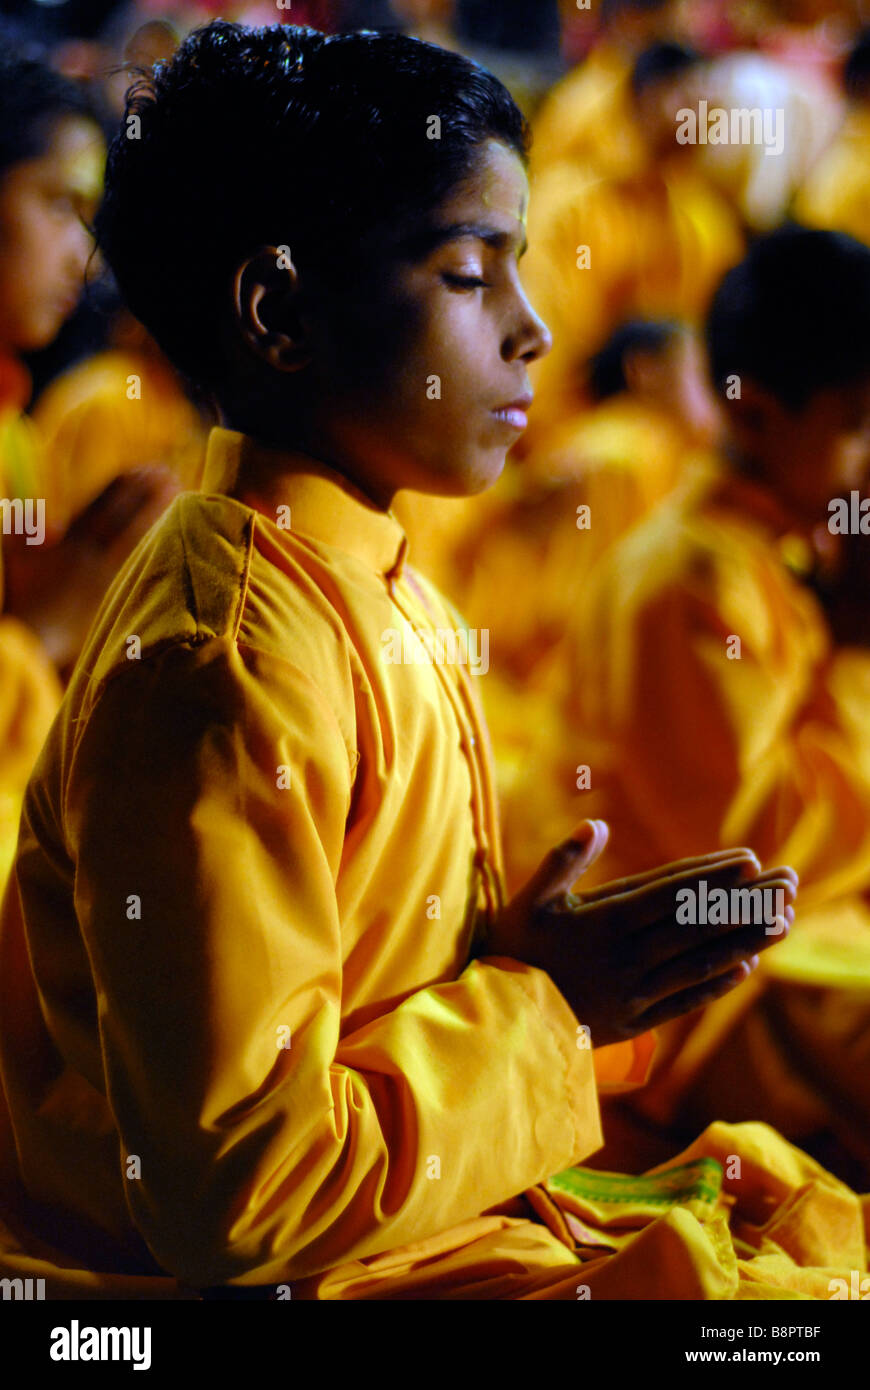 A boy with his hands held in prayer during the Ganga Aarti. Rishikesh, Uttaranchal, India Stock Photo